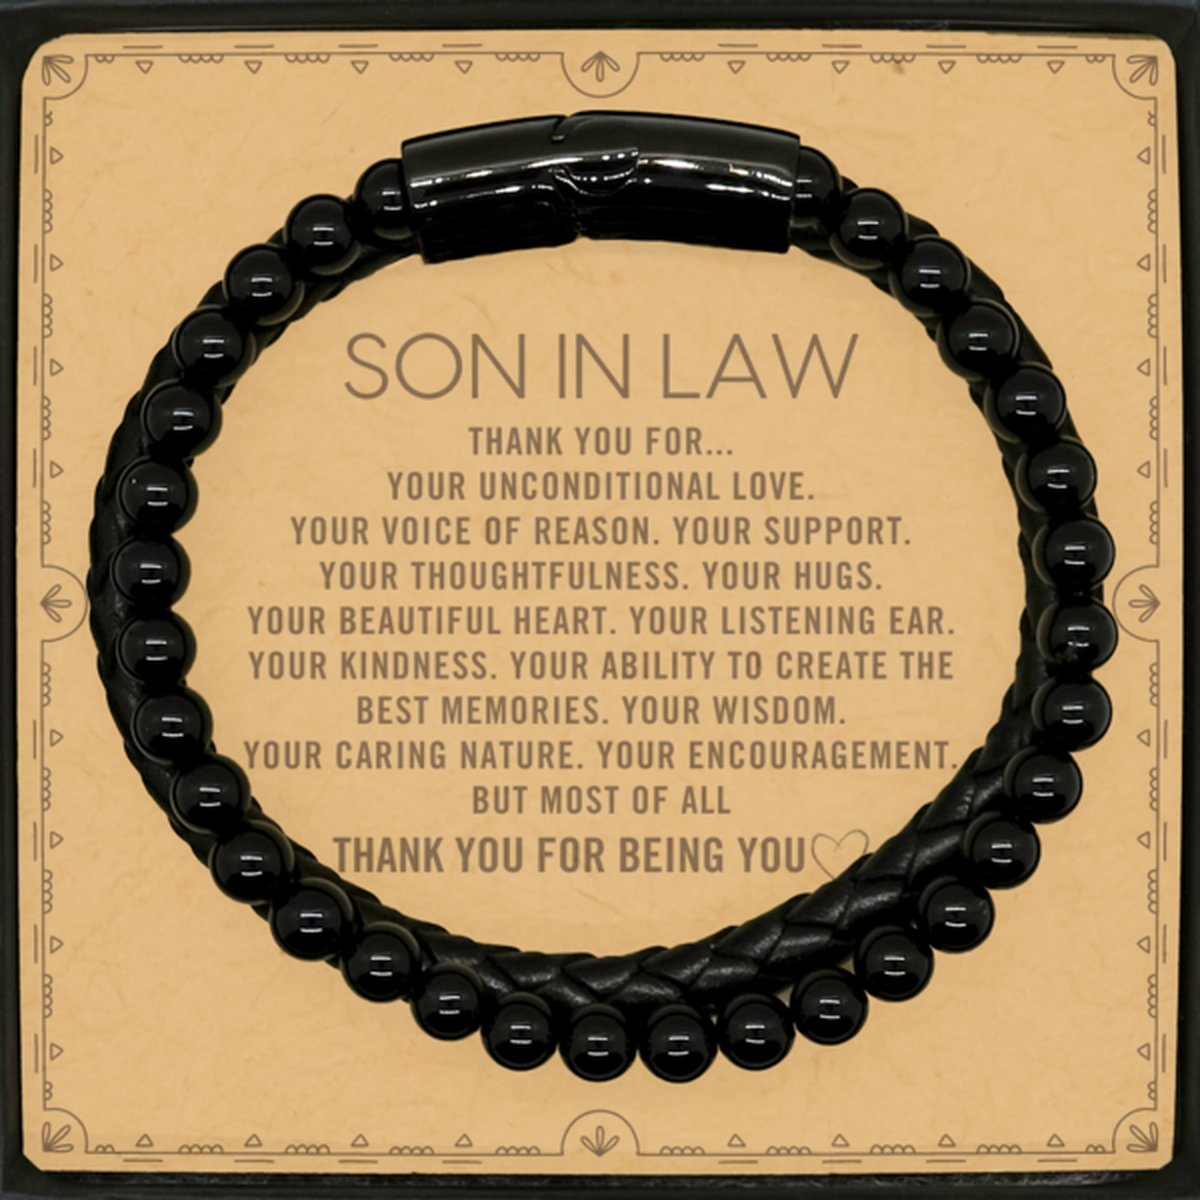 Son In Law Stone Leather Bracelets Custom, Message Card Gifts For Son In Law Christmas Graduation Birthday Gifts for Men Women Son In Law Thank you for Your unconditional love